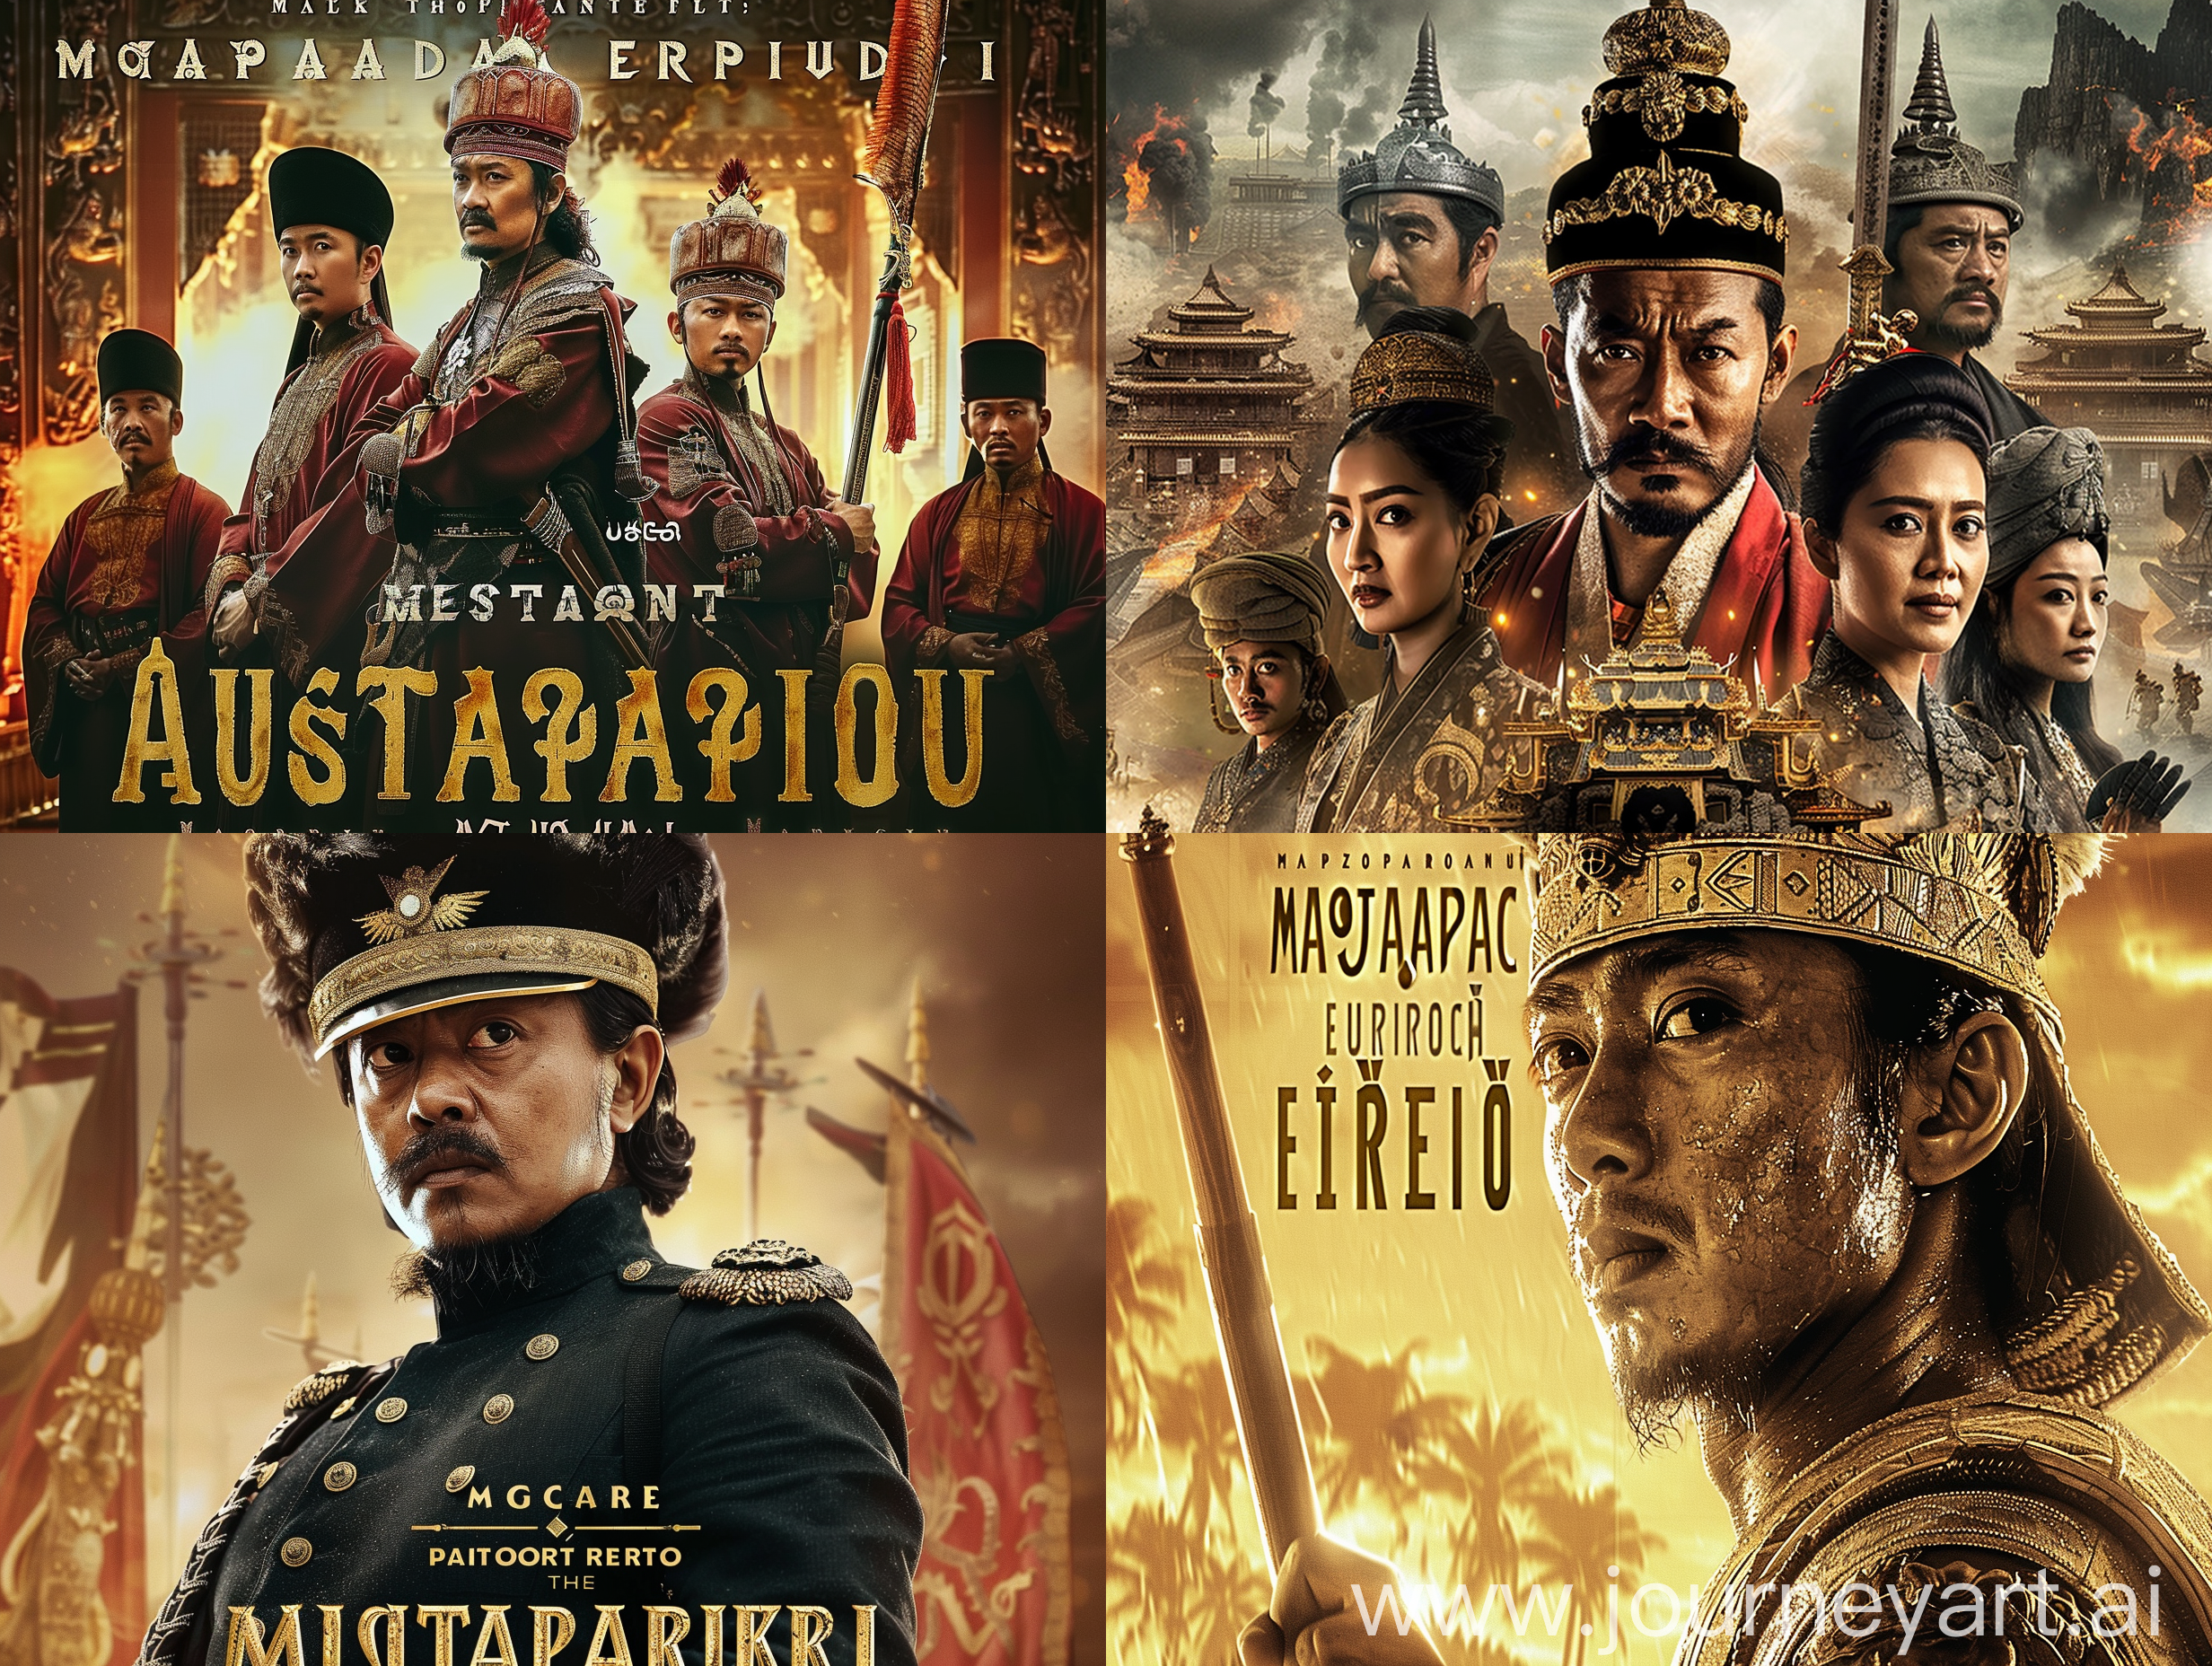 Make a poster for the Indonesian film Majapahit Empire